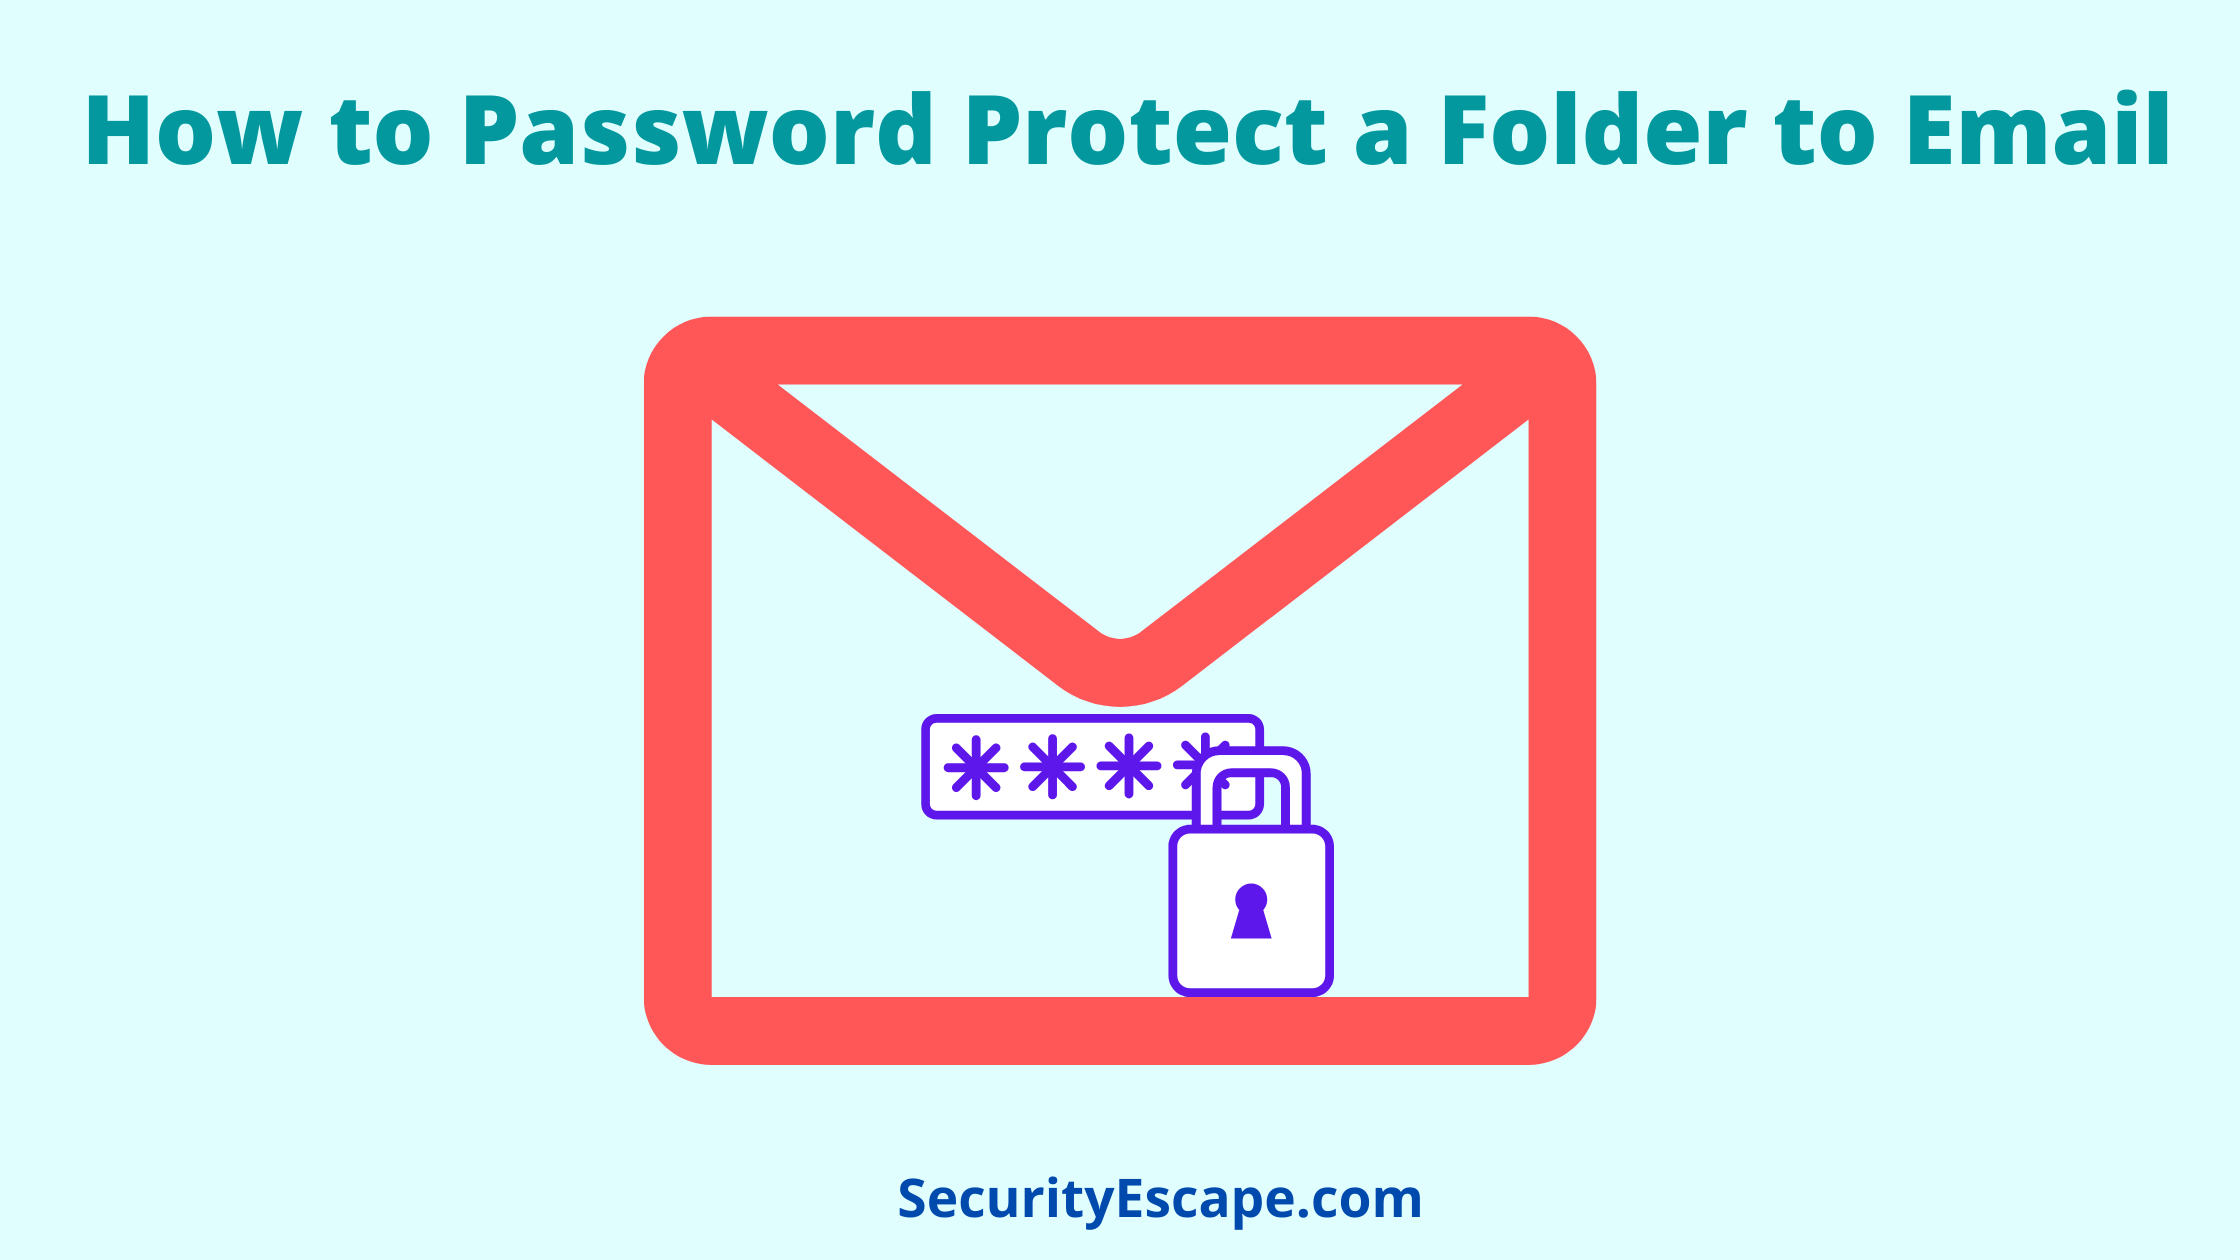 How to Password Protect a Folder to Email